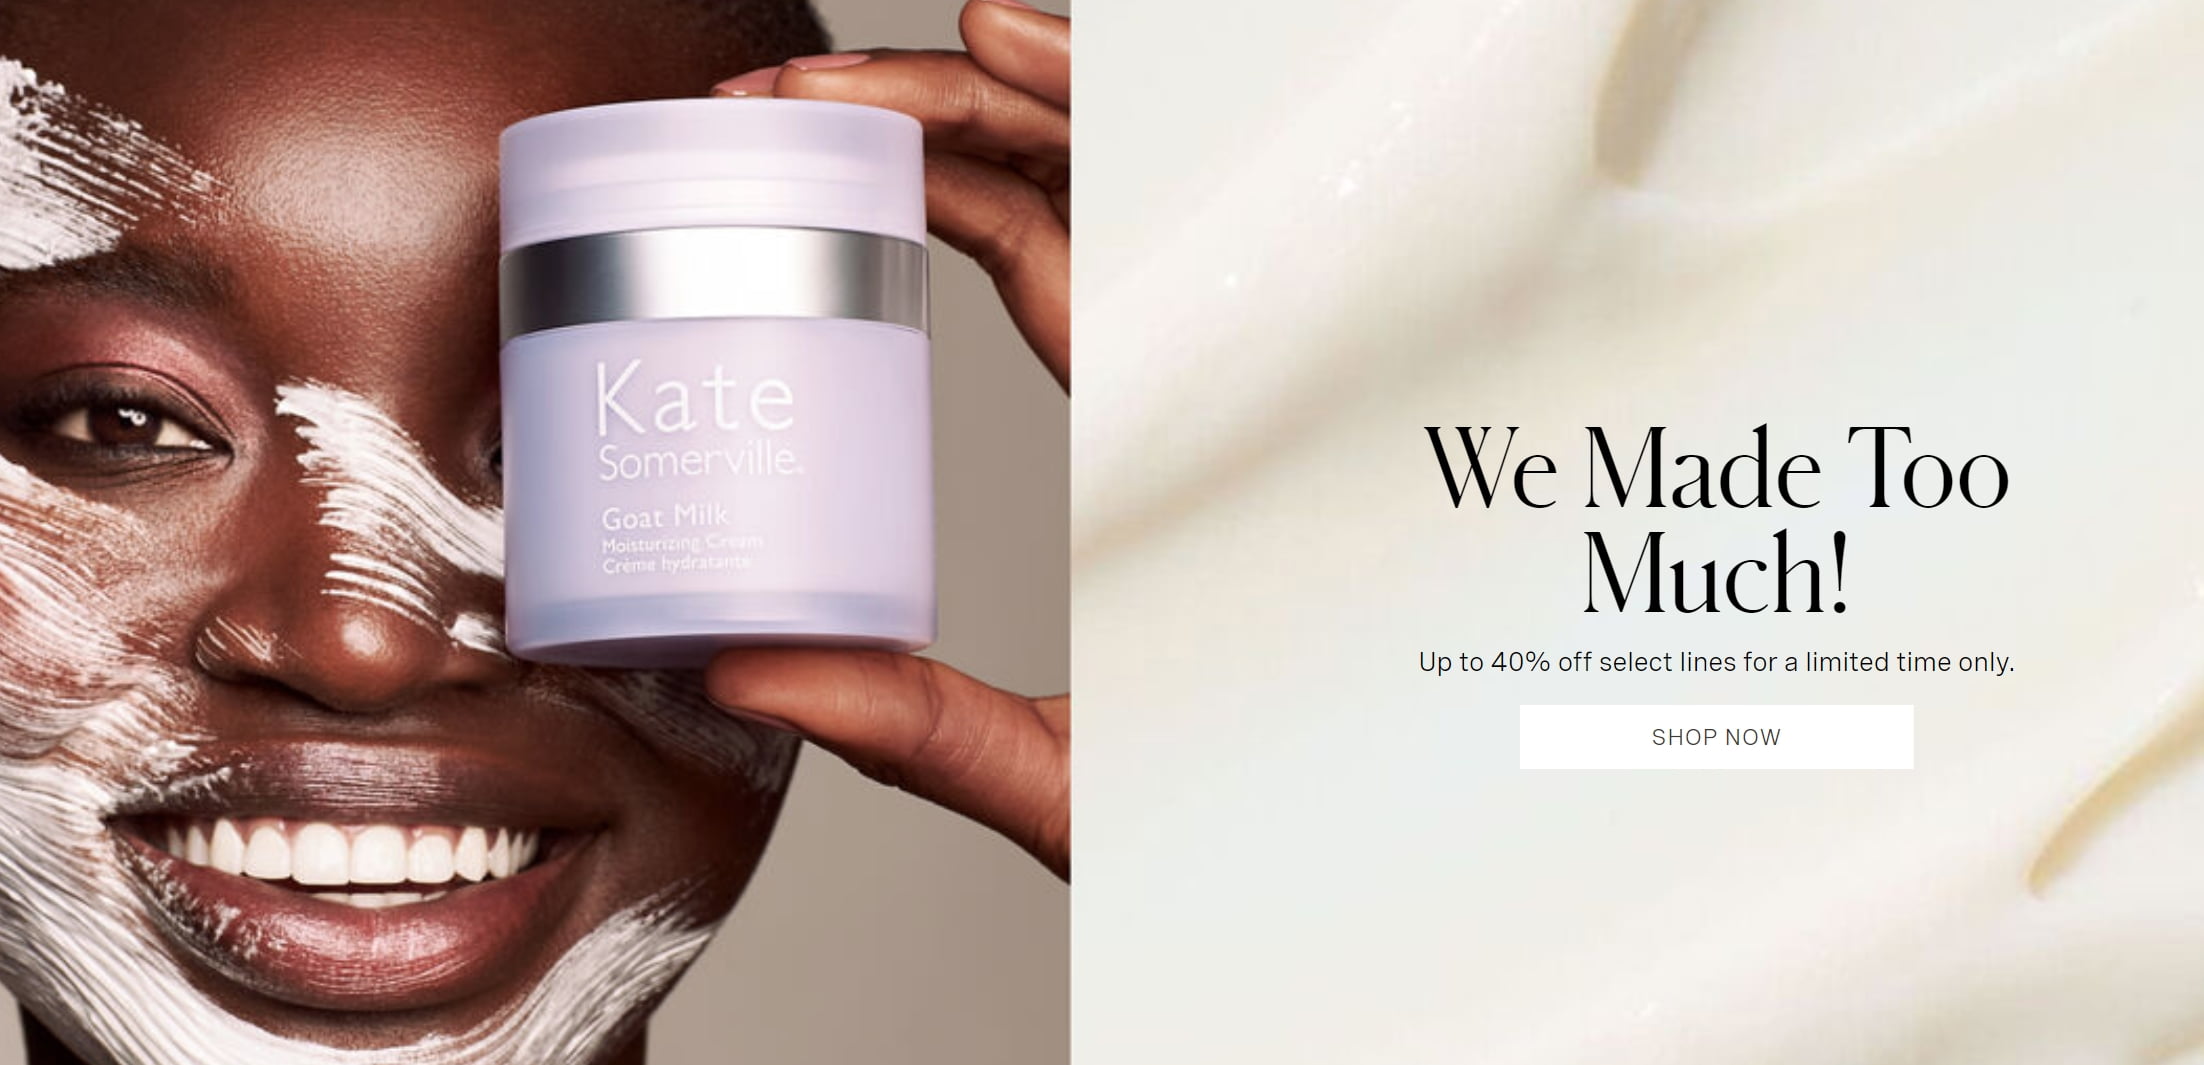 Up to 40% off select lines at Kate Somerville.